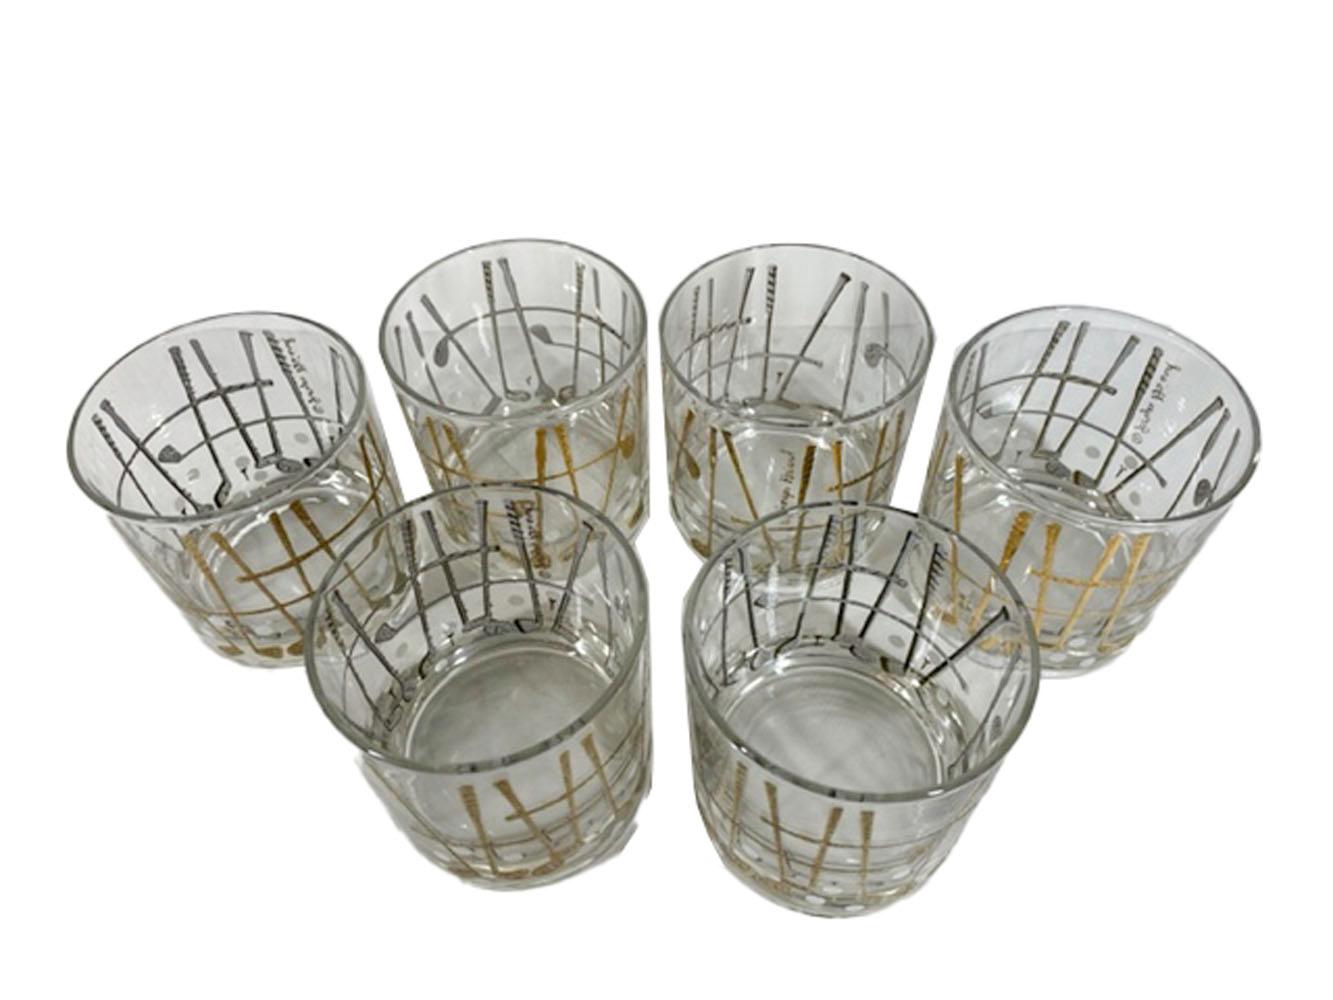 Mid-Century Modern Vintage Georges Briard Rocks Glasses in the Golf Pattern Executed in 22k Gold